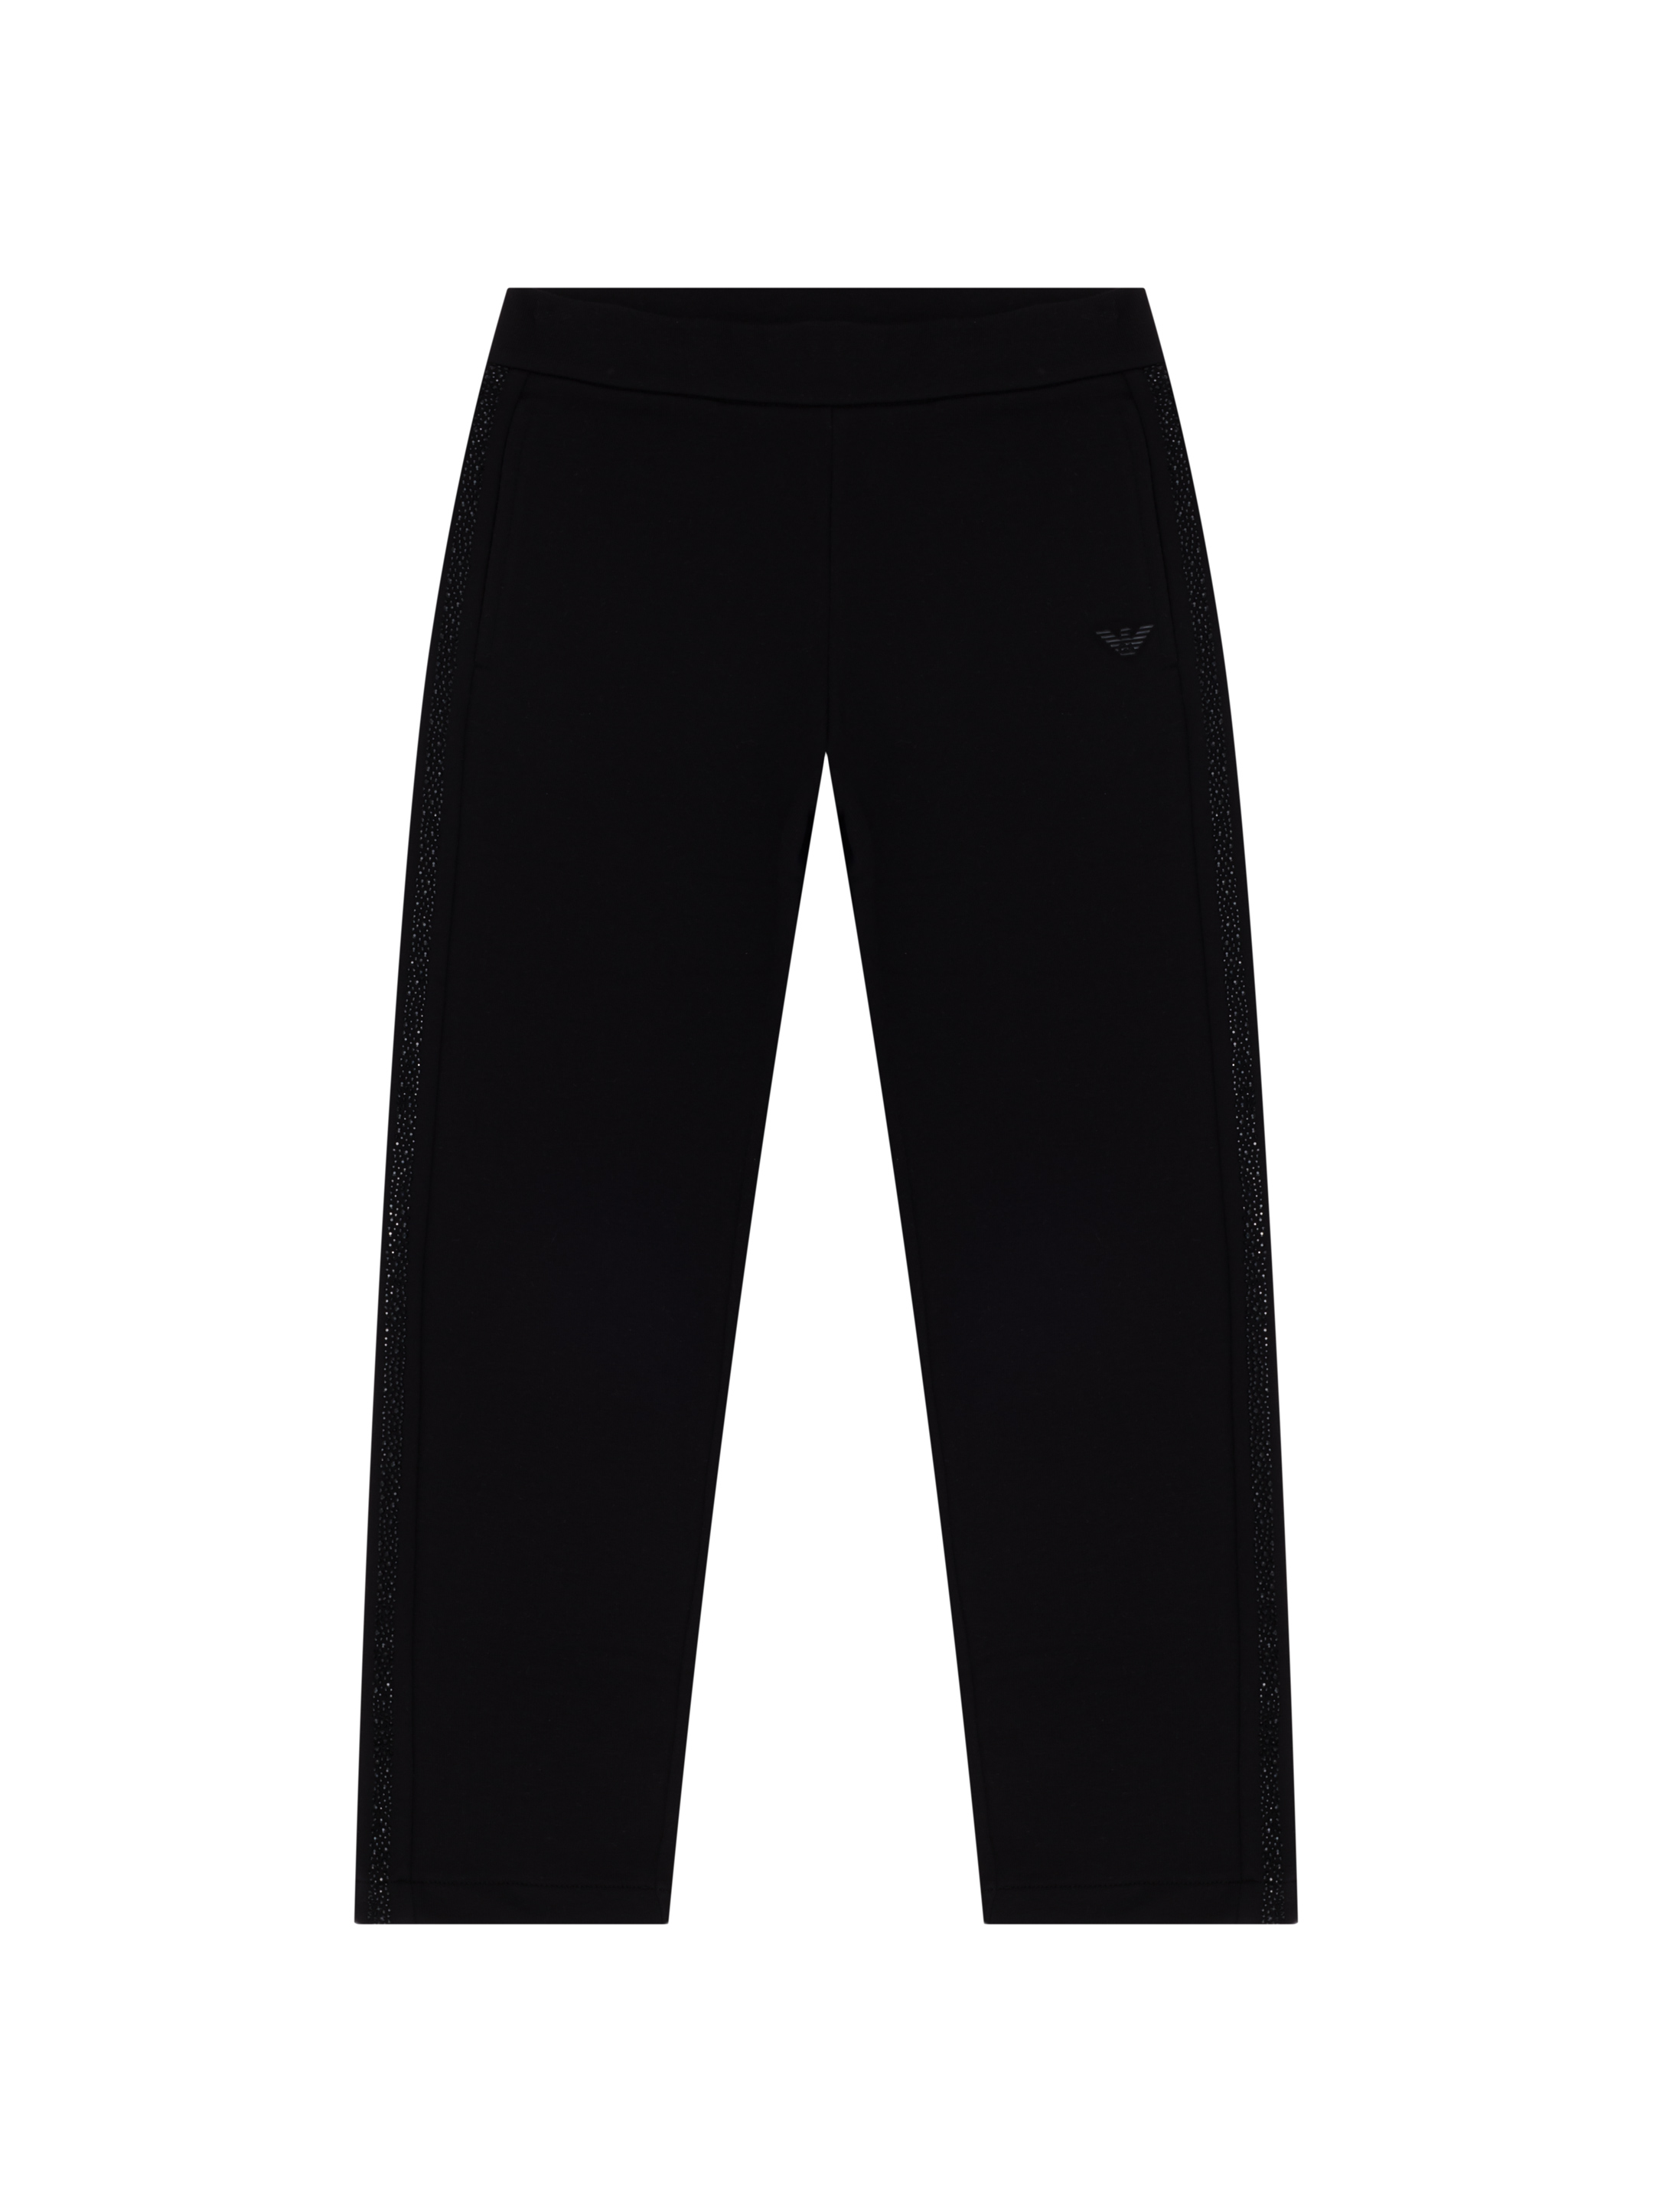 EMPORIO ARMANI kids' Sport pants with rhinestones - buy for 114100 KZT in  the official Viled online store, art. 3R3P7H 